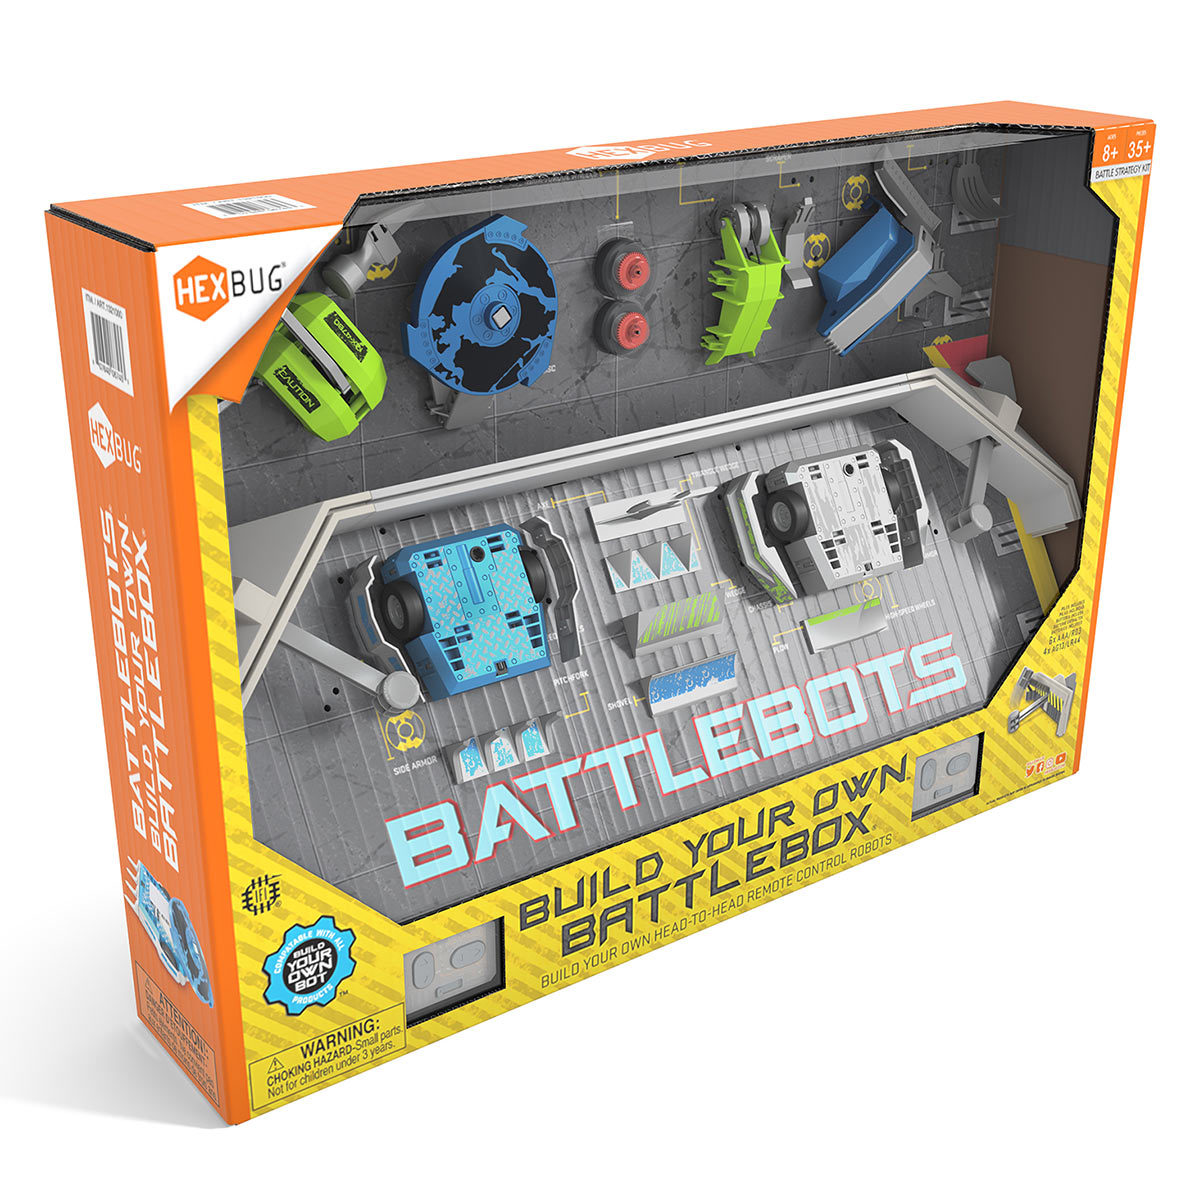 Battlebots boxed image from side